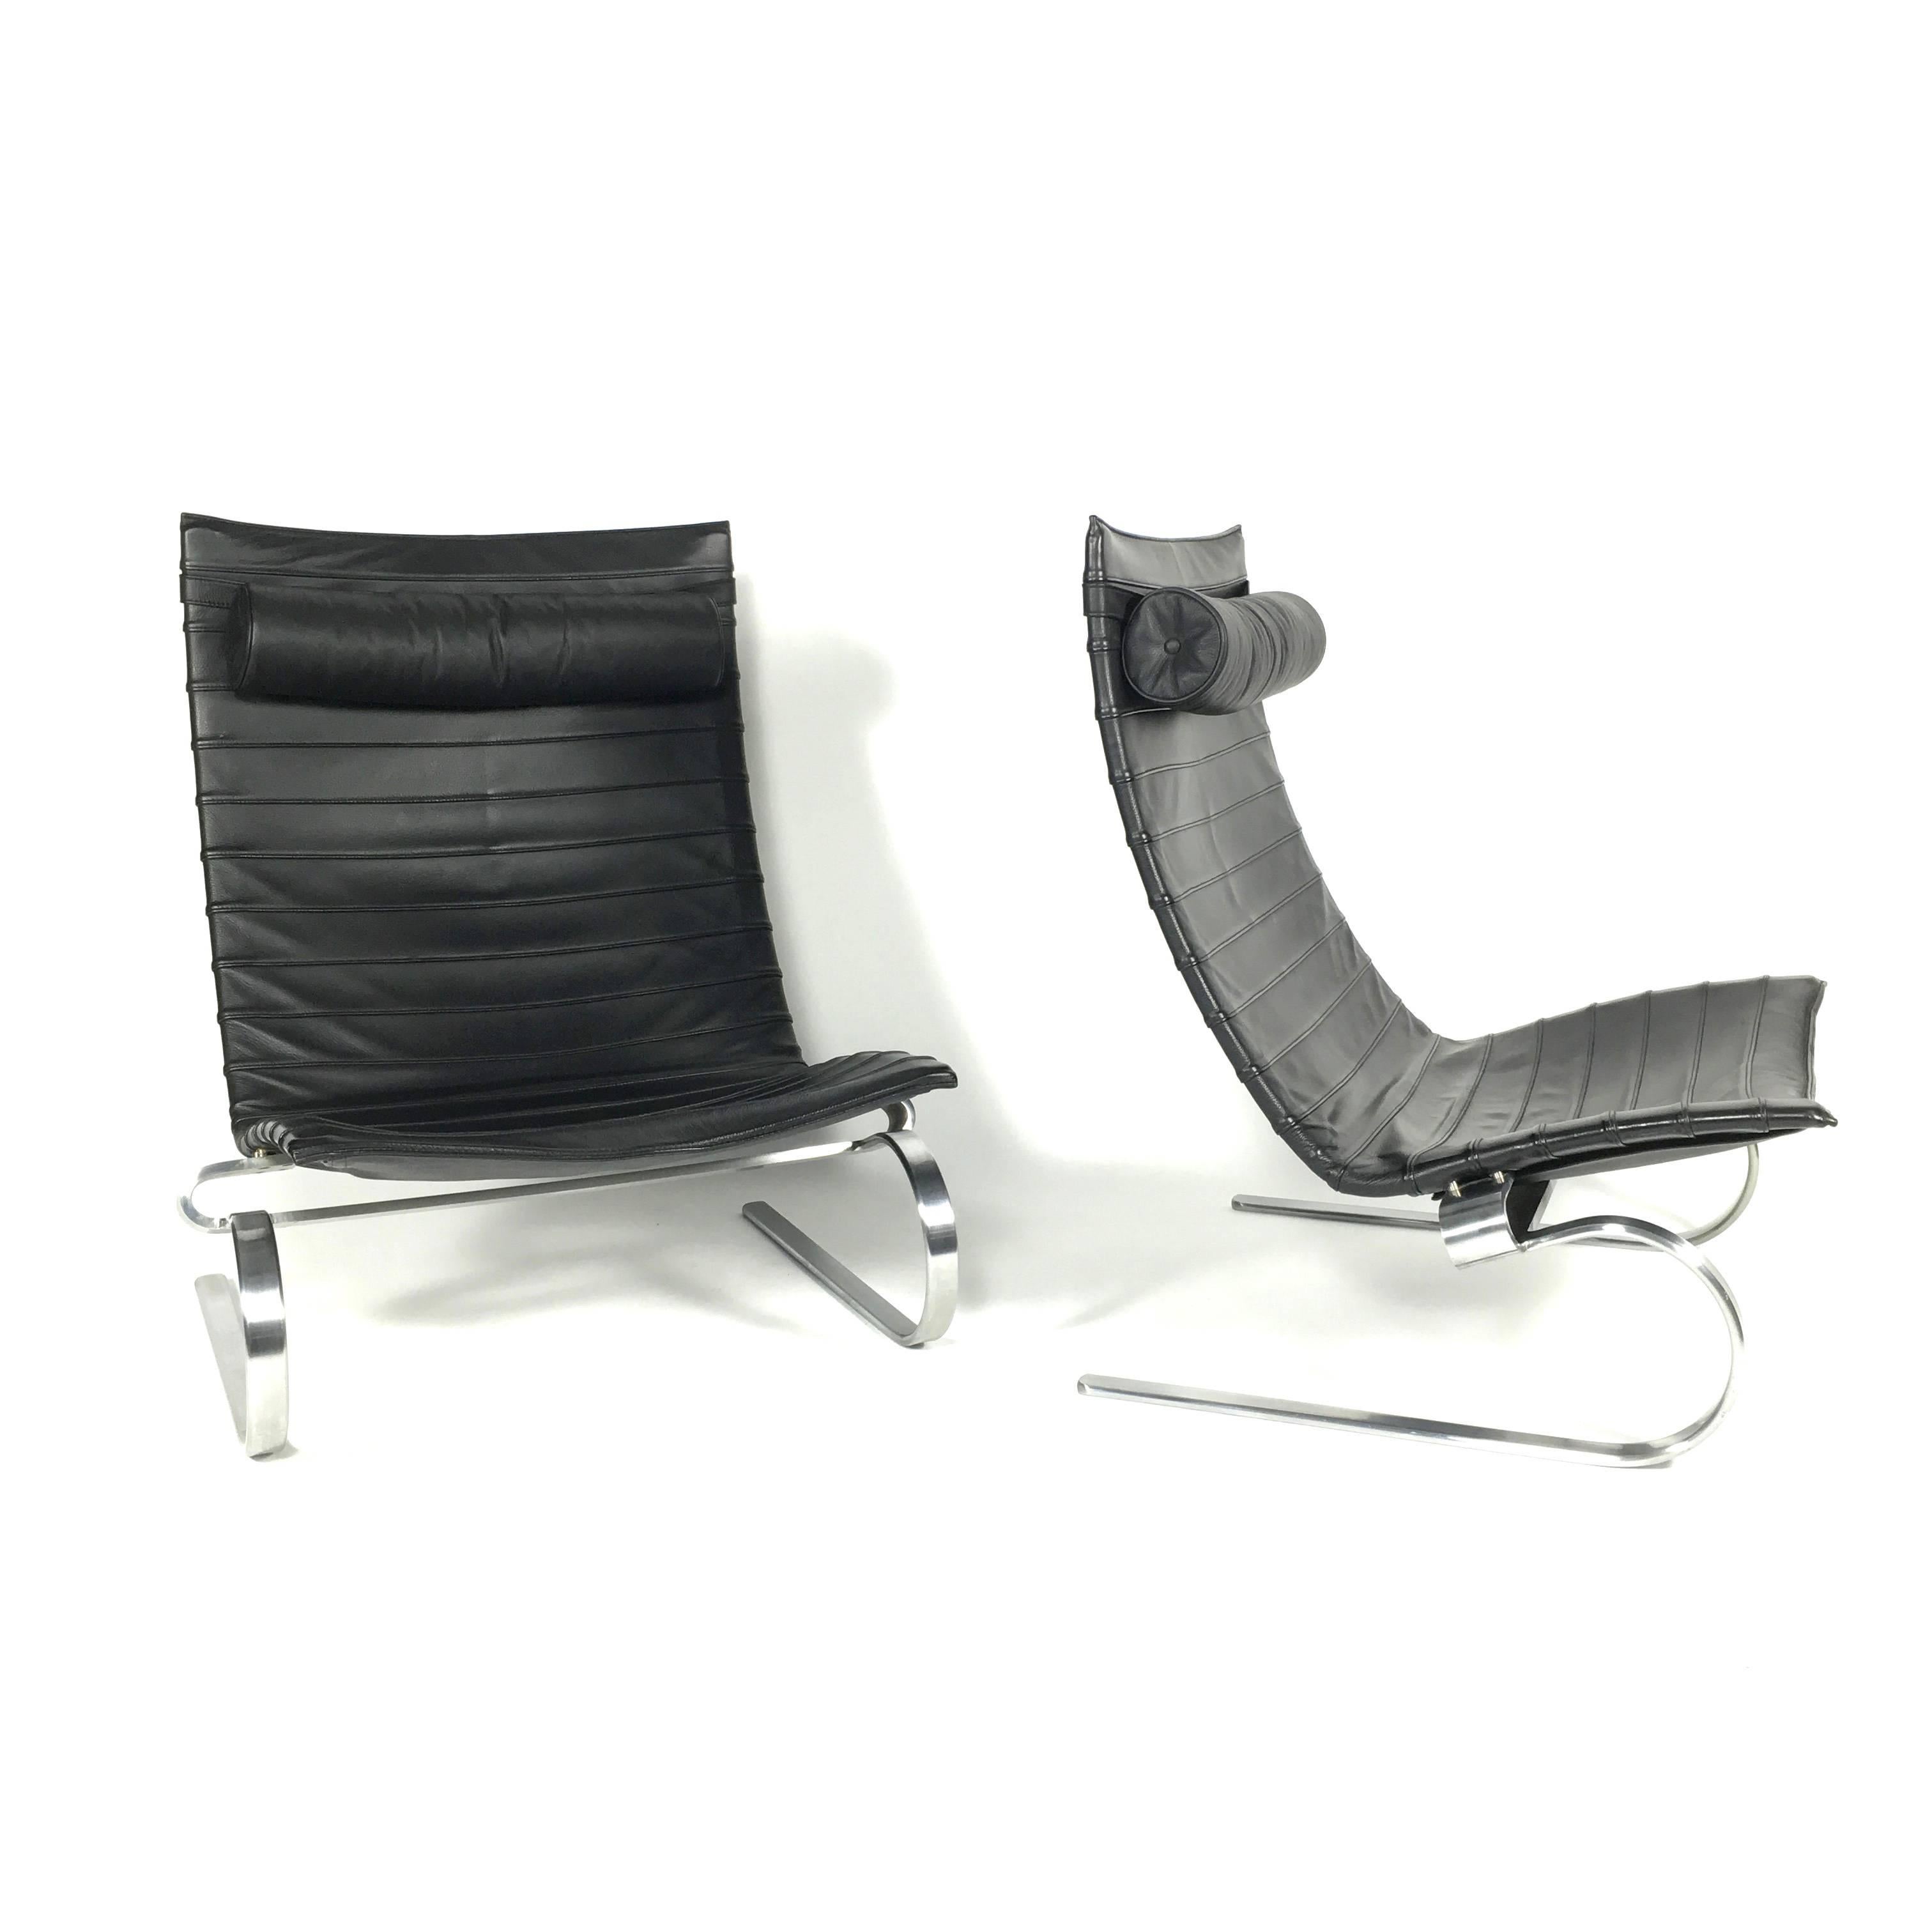 Beautiful pair of black leather PK20 lounge chairs by Poul Kjaerholm for Fritz Hansen, Denmark.
Poul Kjaerholm wanted to sell the production rights to Fritz Hansen but they declined at first. After a great success of manufacturing with E. Kold